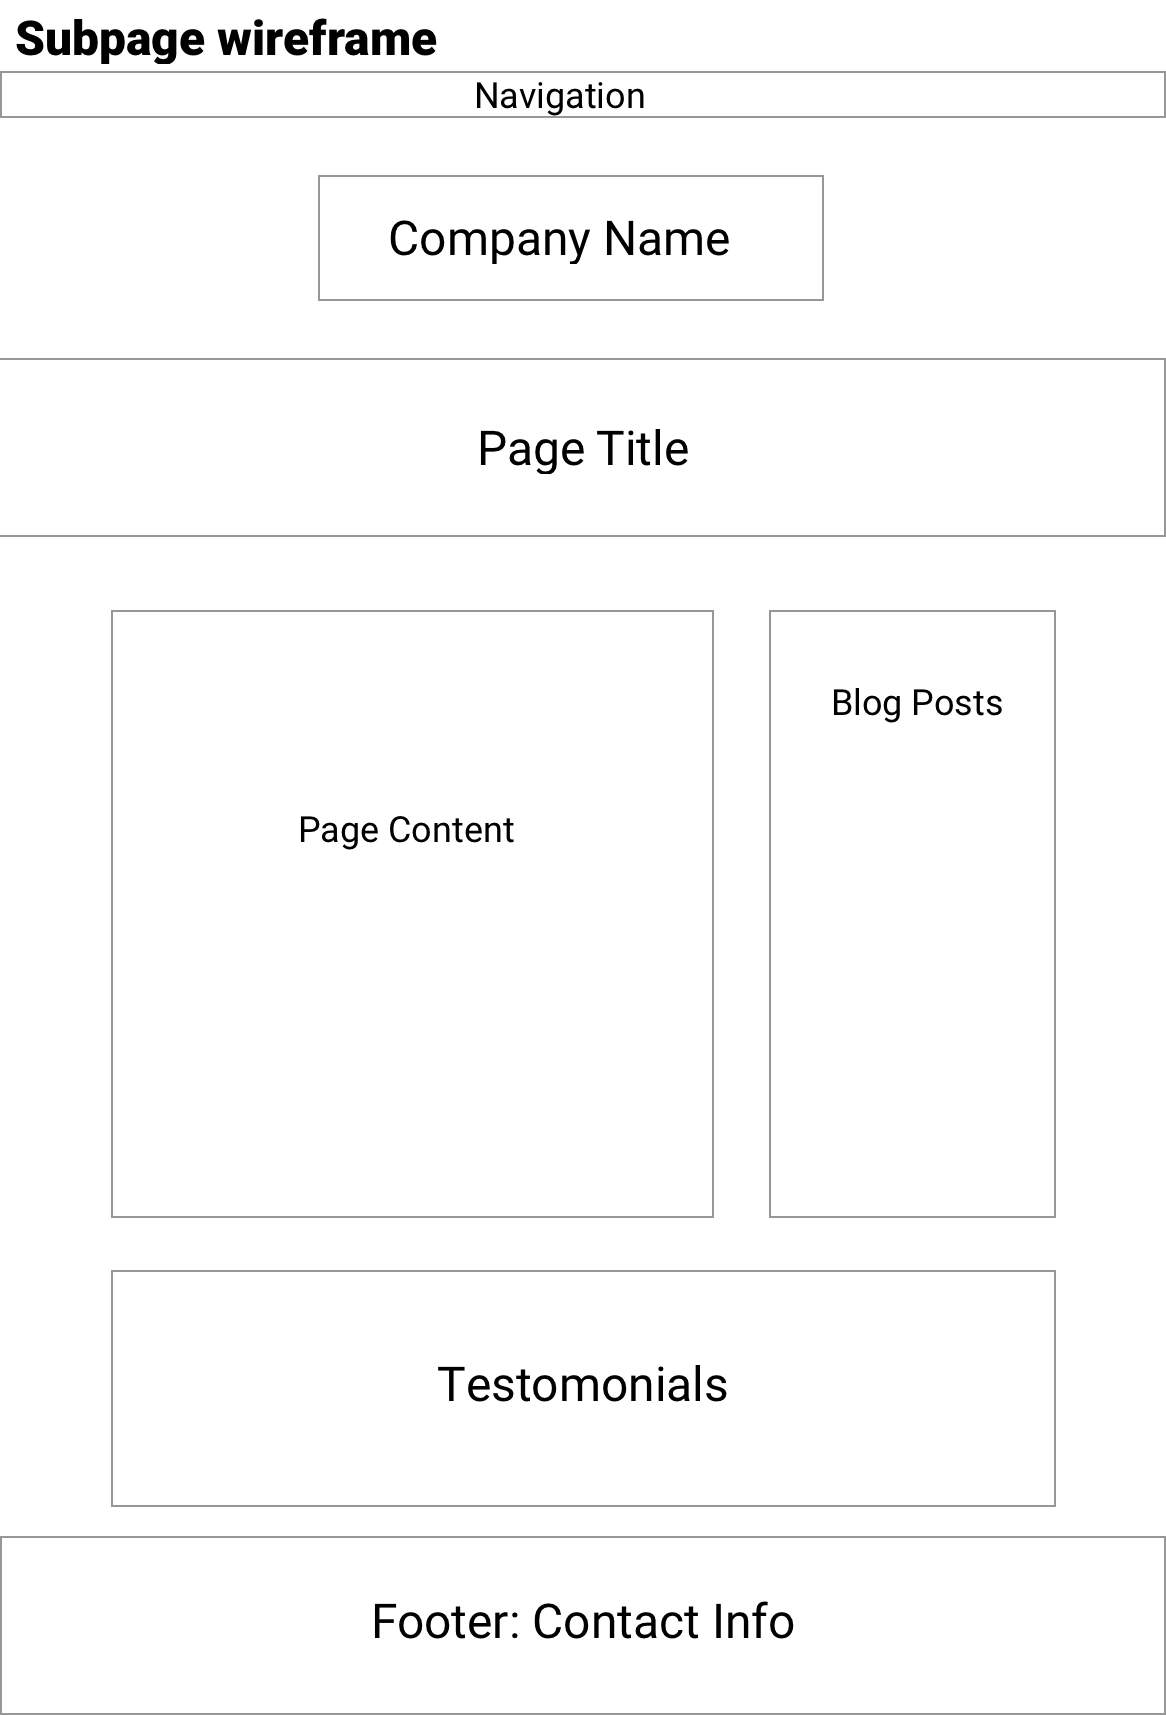 Subpage wireframe